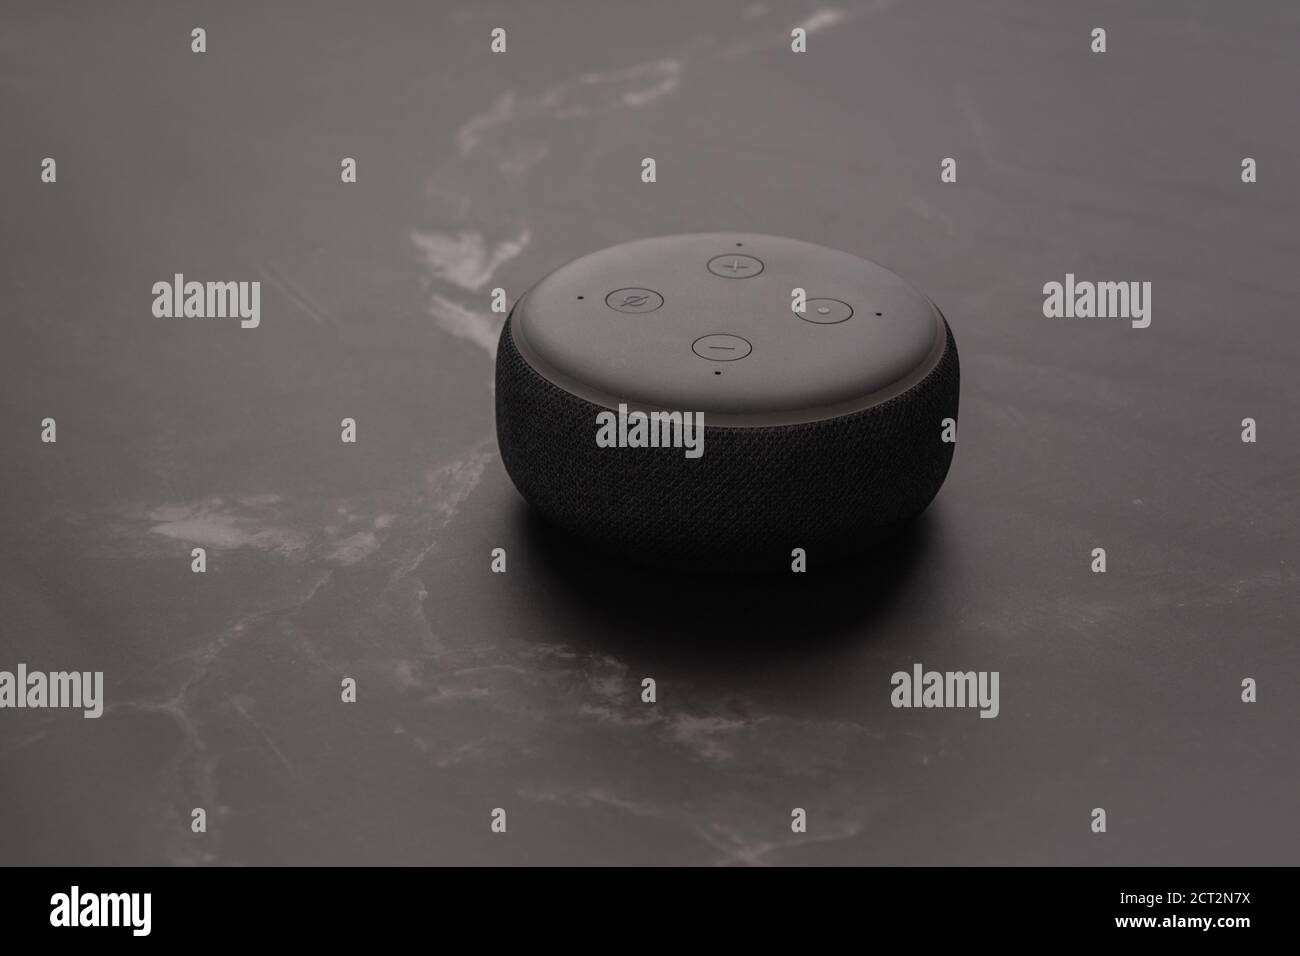 LONDON, UNITED KINGDOM - SEPTEMBER 20 2020: Close-up of an Amazon Echo Dot, the virtual assistant speaker, with a modern marble stone background. Stock Photo